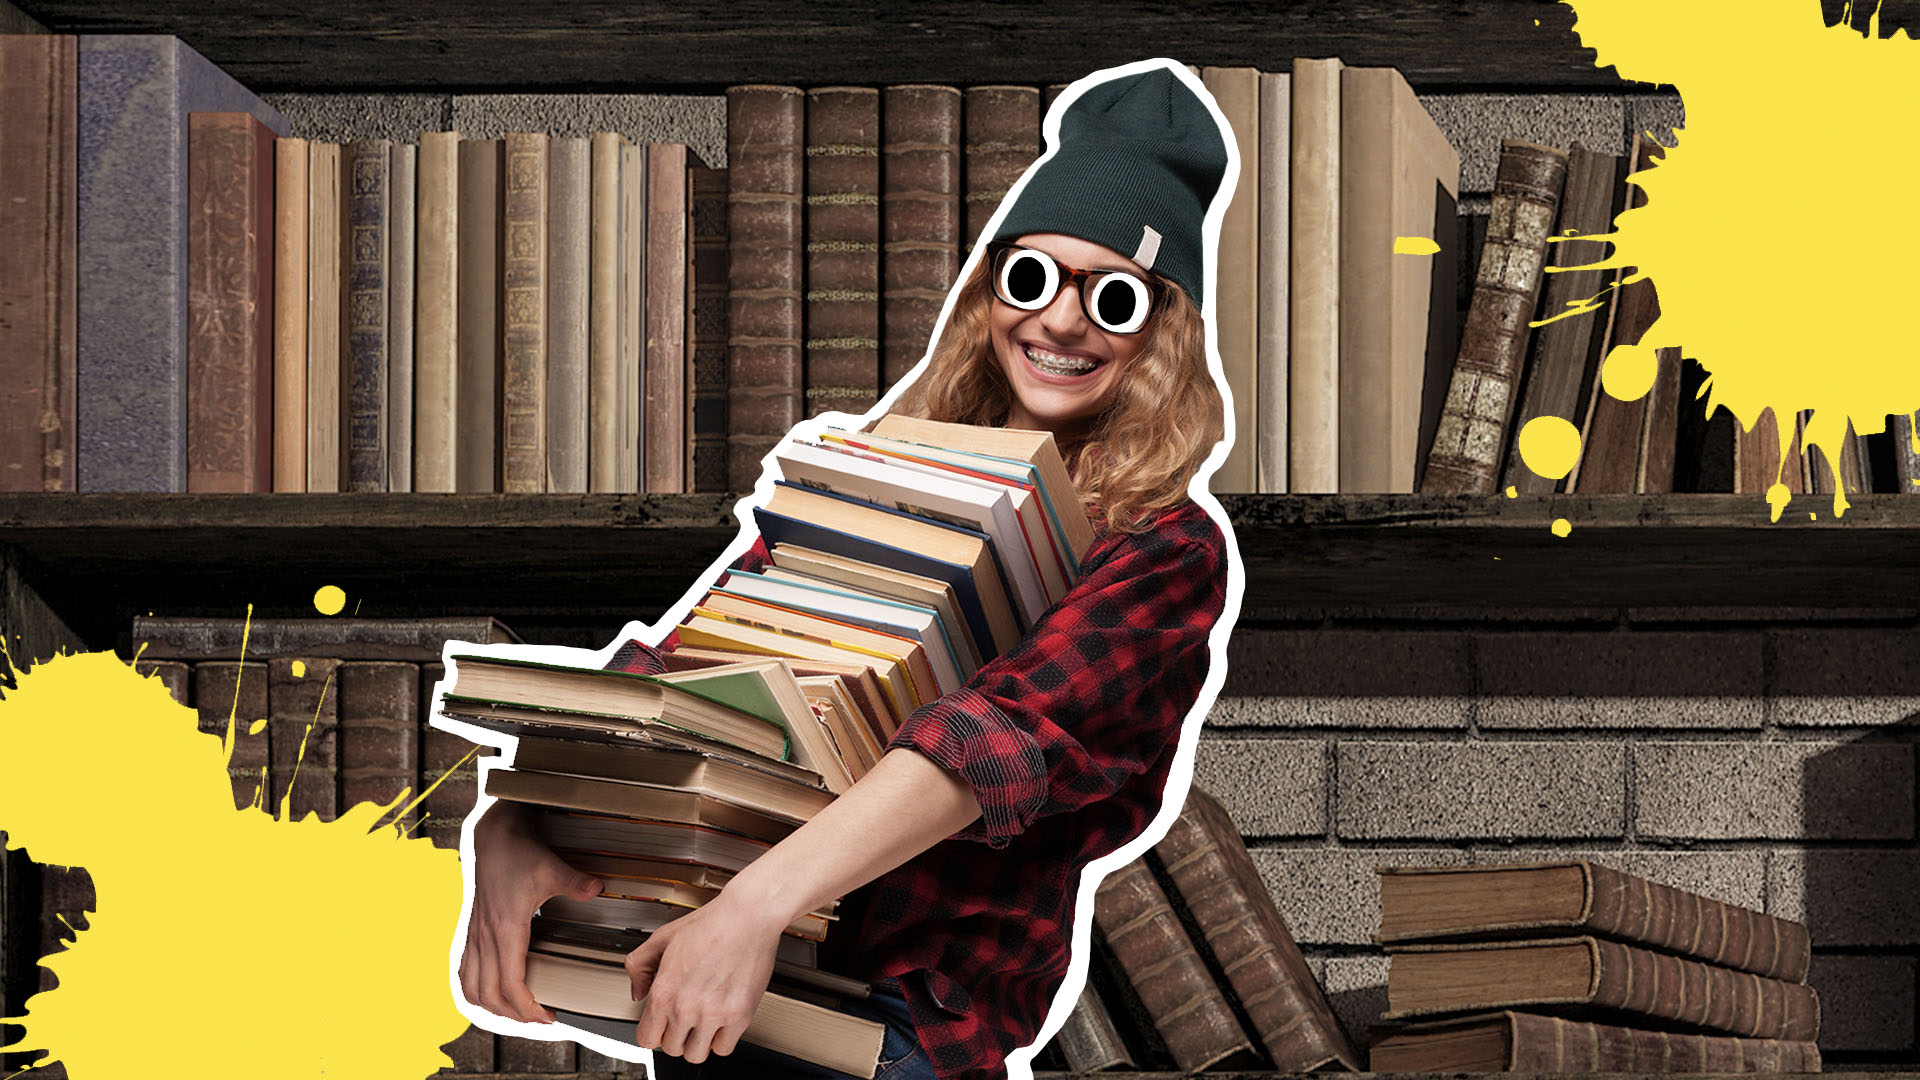 A woman carrying a stack of books